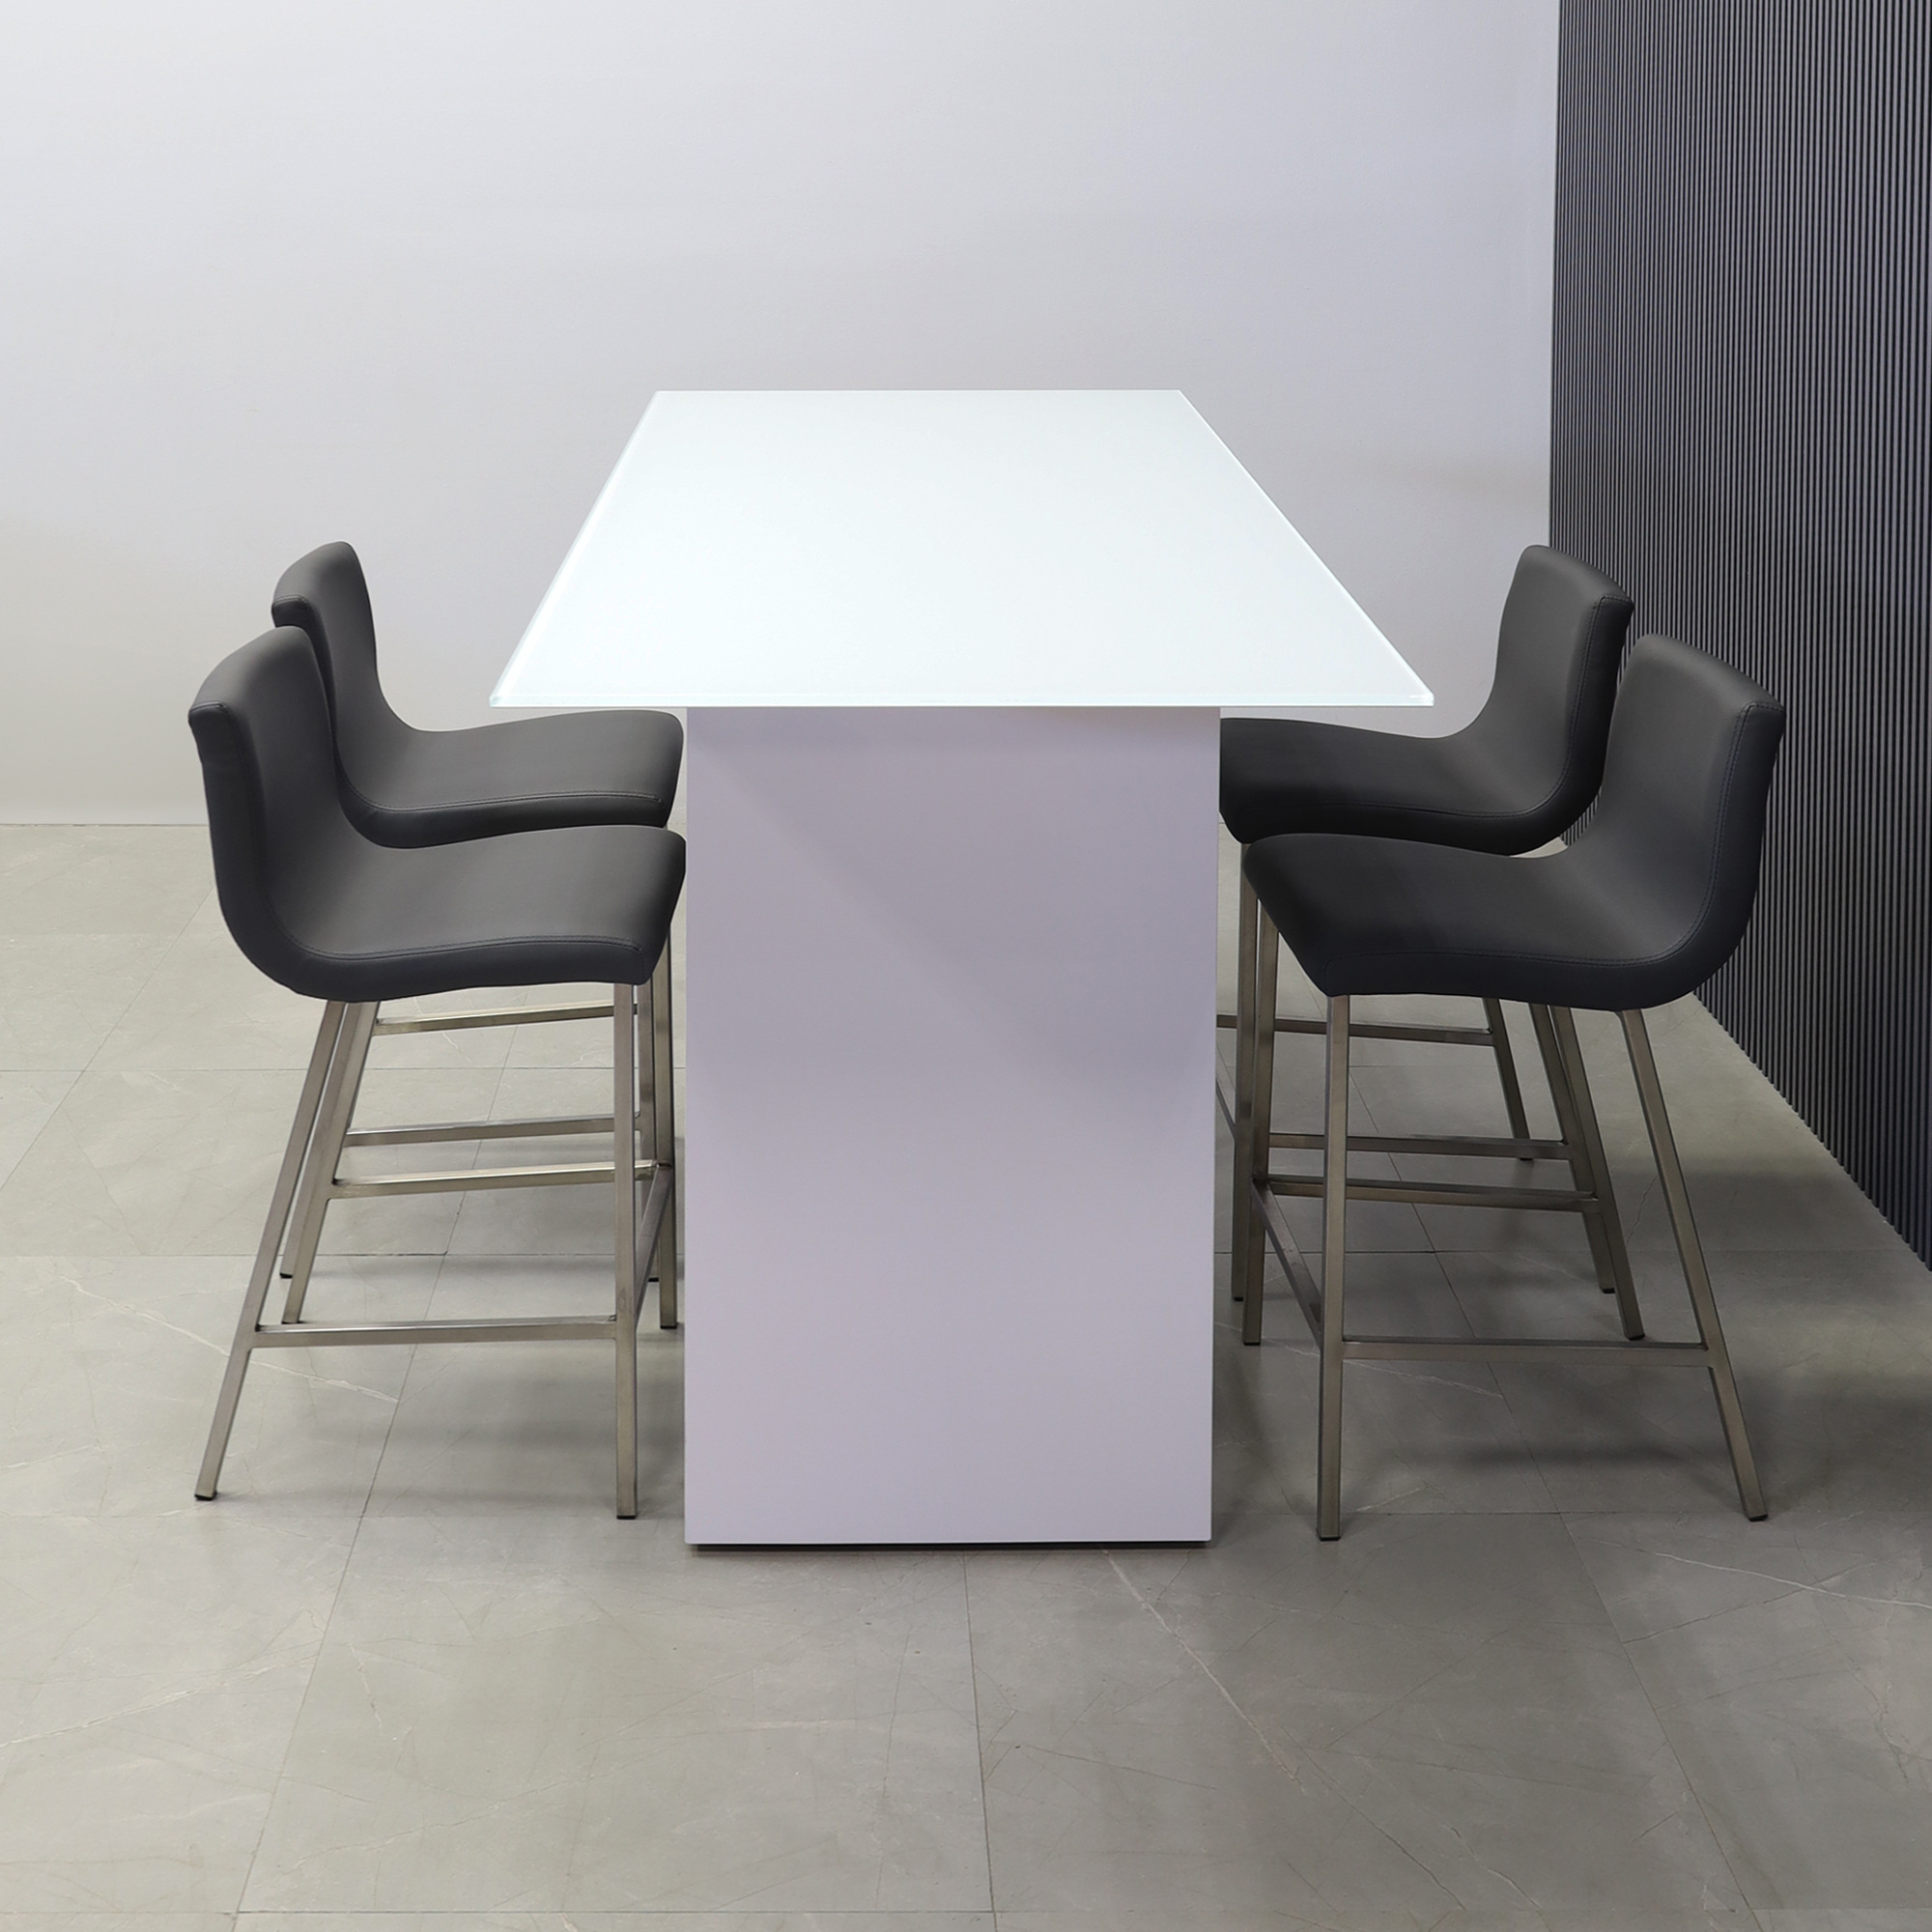 60-inch width x 42-height, Ashville Tempered Glass Collaboration Table in 1/2